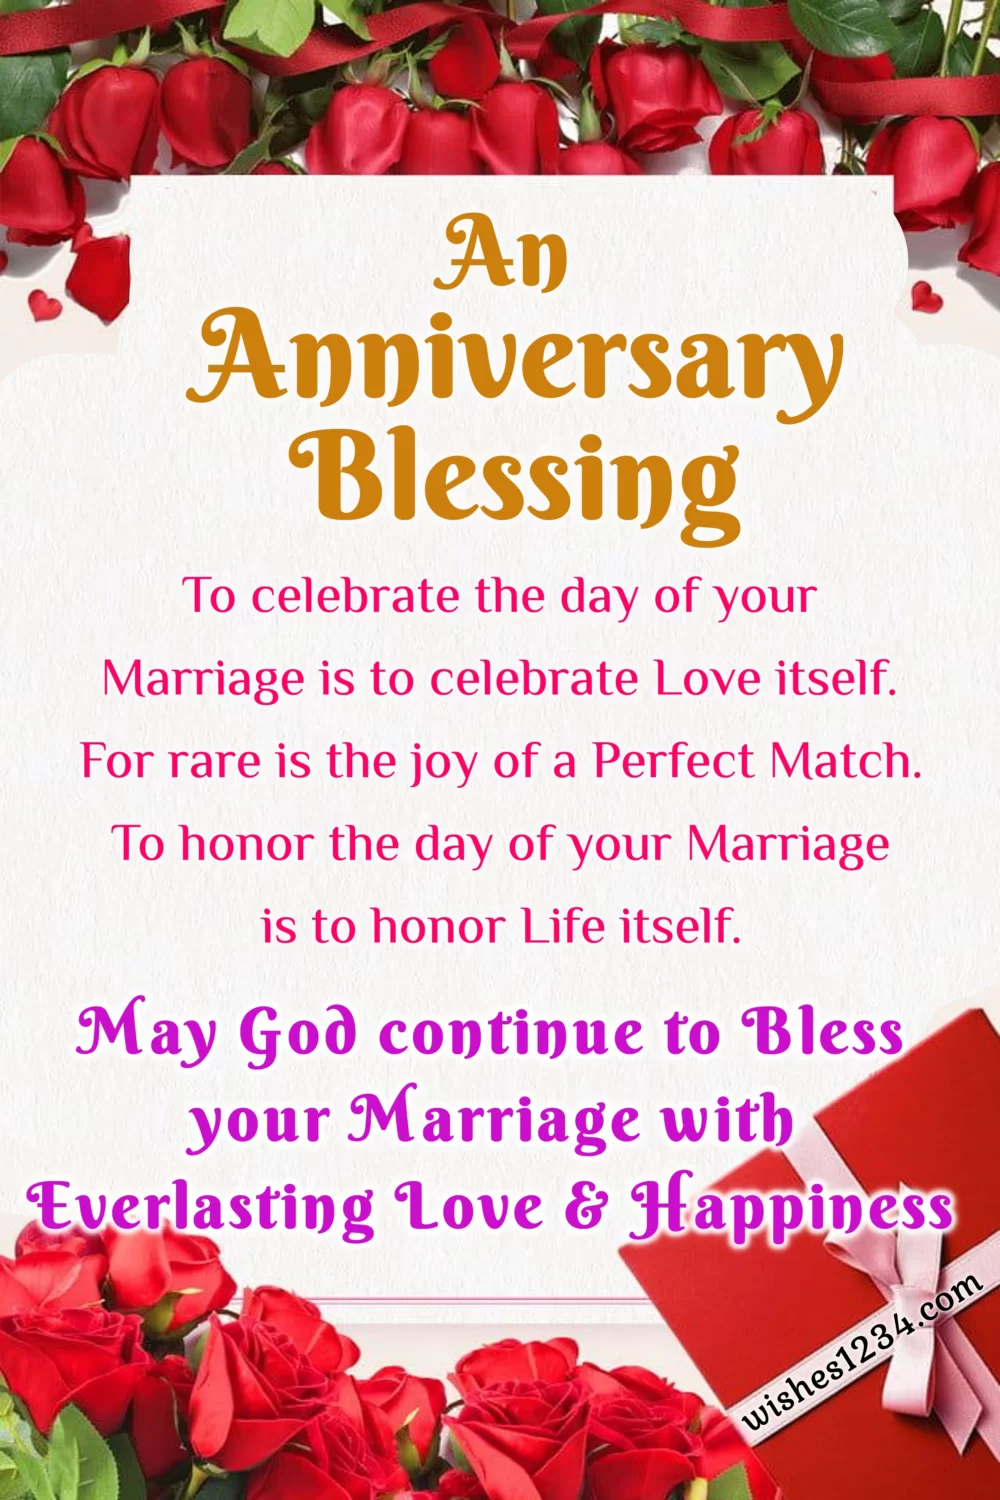 Wedding anniversary blessing with red roses background, Anniversary Quotes.